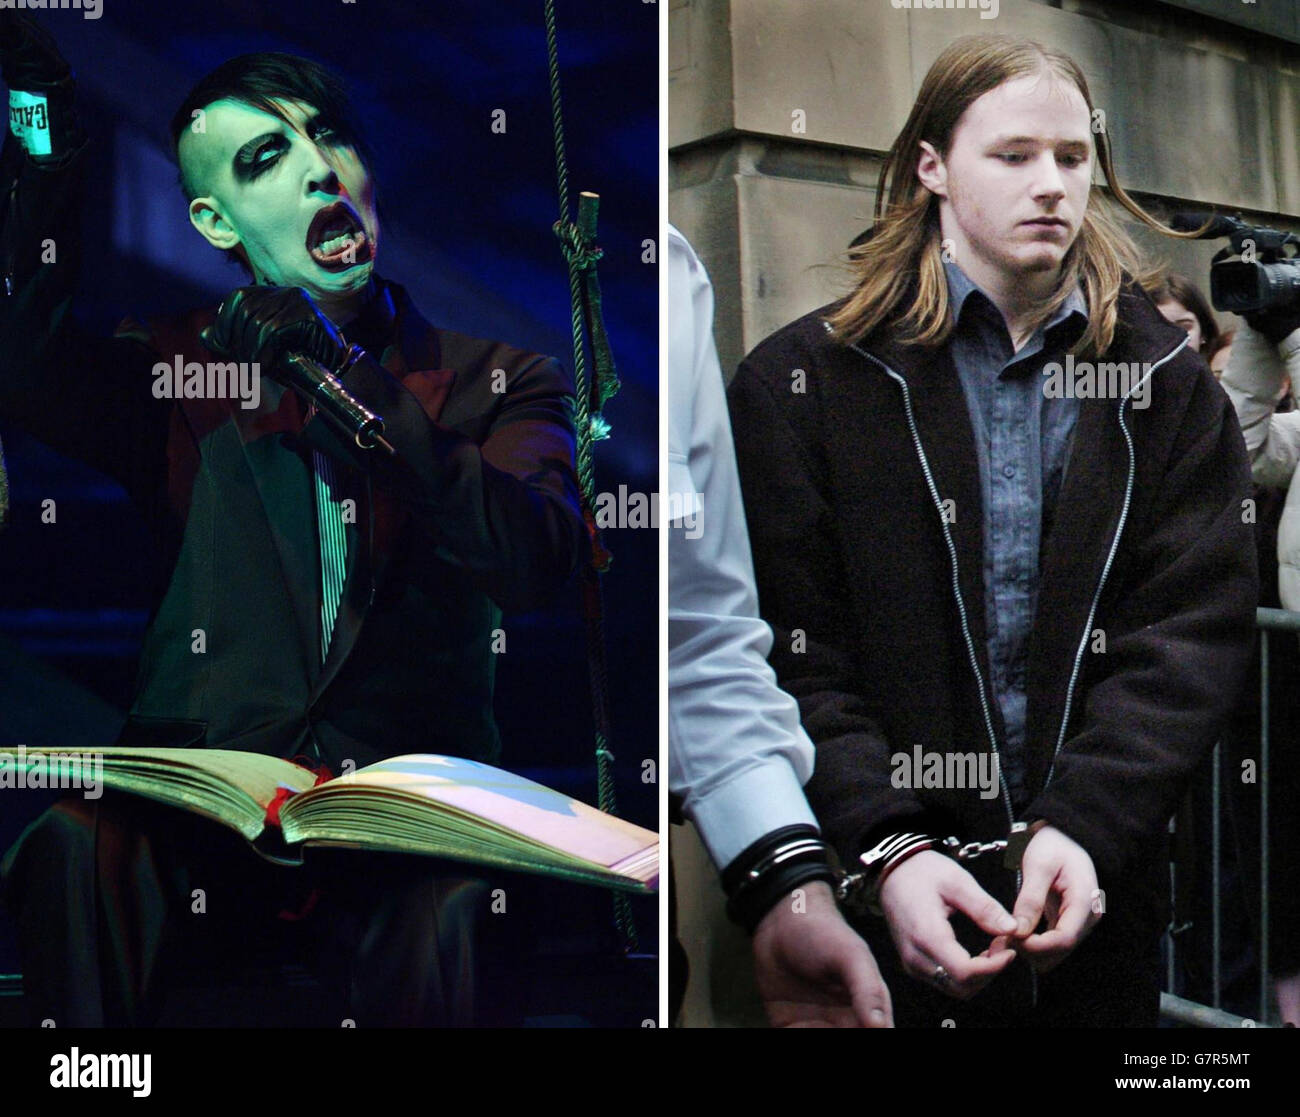 American rock singer Marilyn Manson (left) and Luke Mitchell, the killer of schoolgirl Jodi Jones. Goth rock star Marilyn Manson has dismissed suggestions that his work may have inspired Mitchell to kill Jodi. The schoolgirl's death and her injuries bore similarities to the gruesome 'Black Dahlia' murder of 1940s Hollywood actress Elizabeth Short. Mitchell was a fan of Manson, who produced paintings depicting Short's killing. Stock Photo